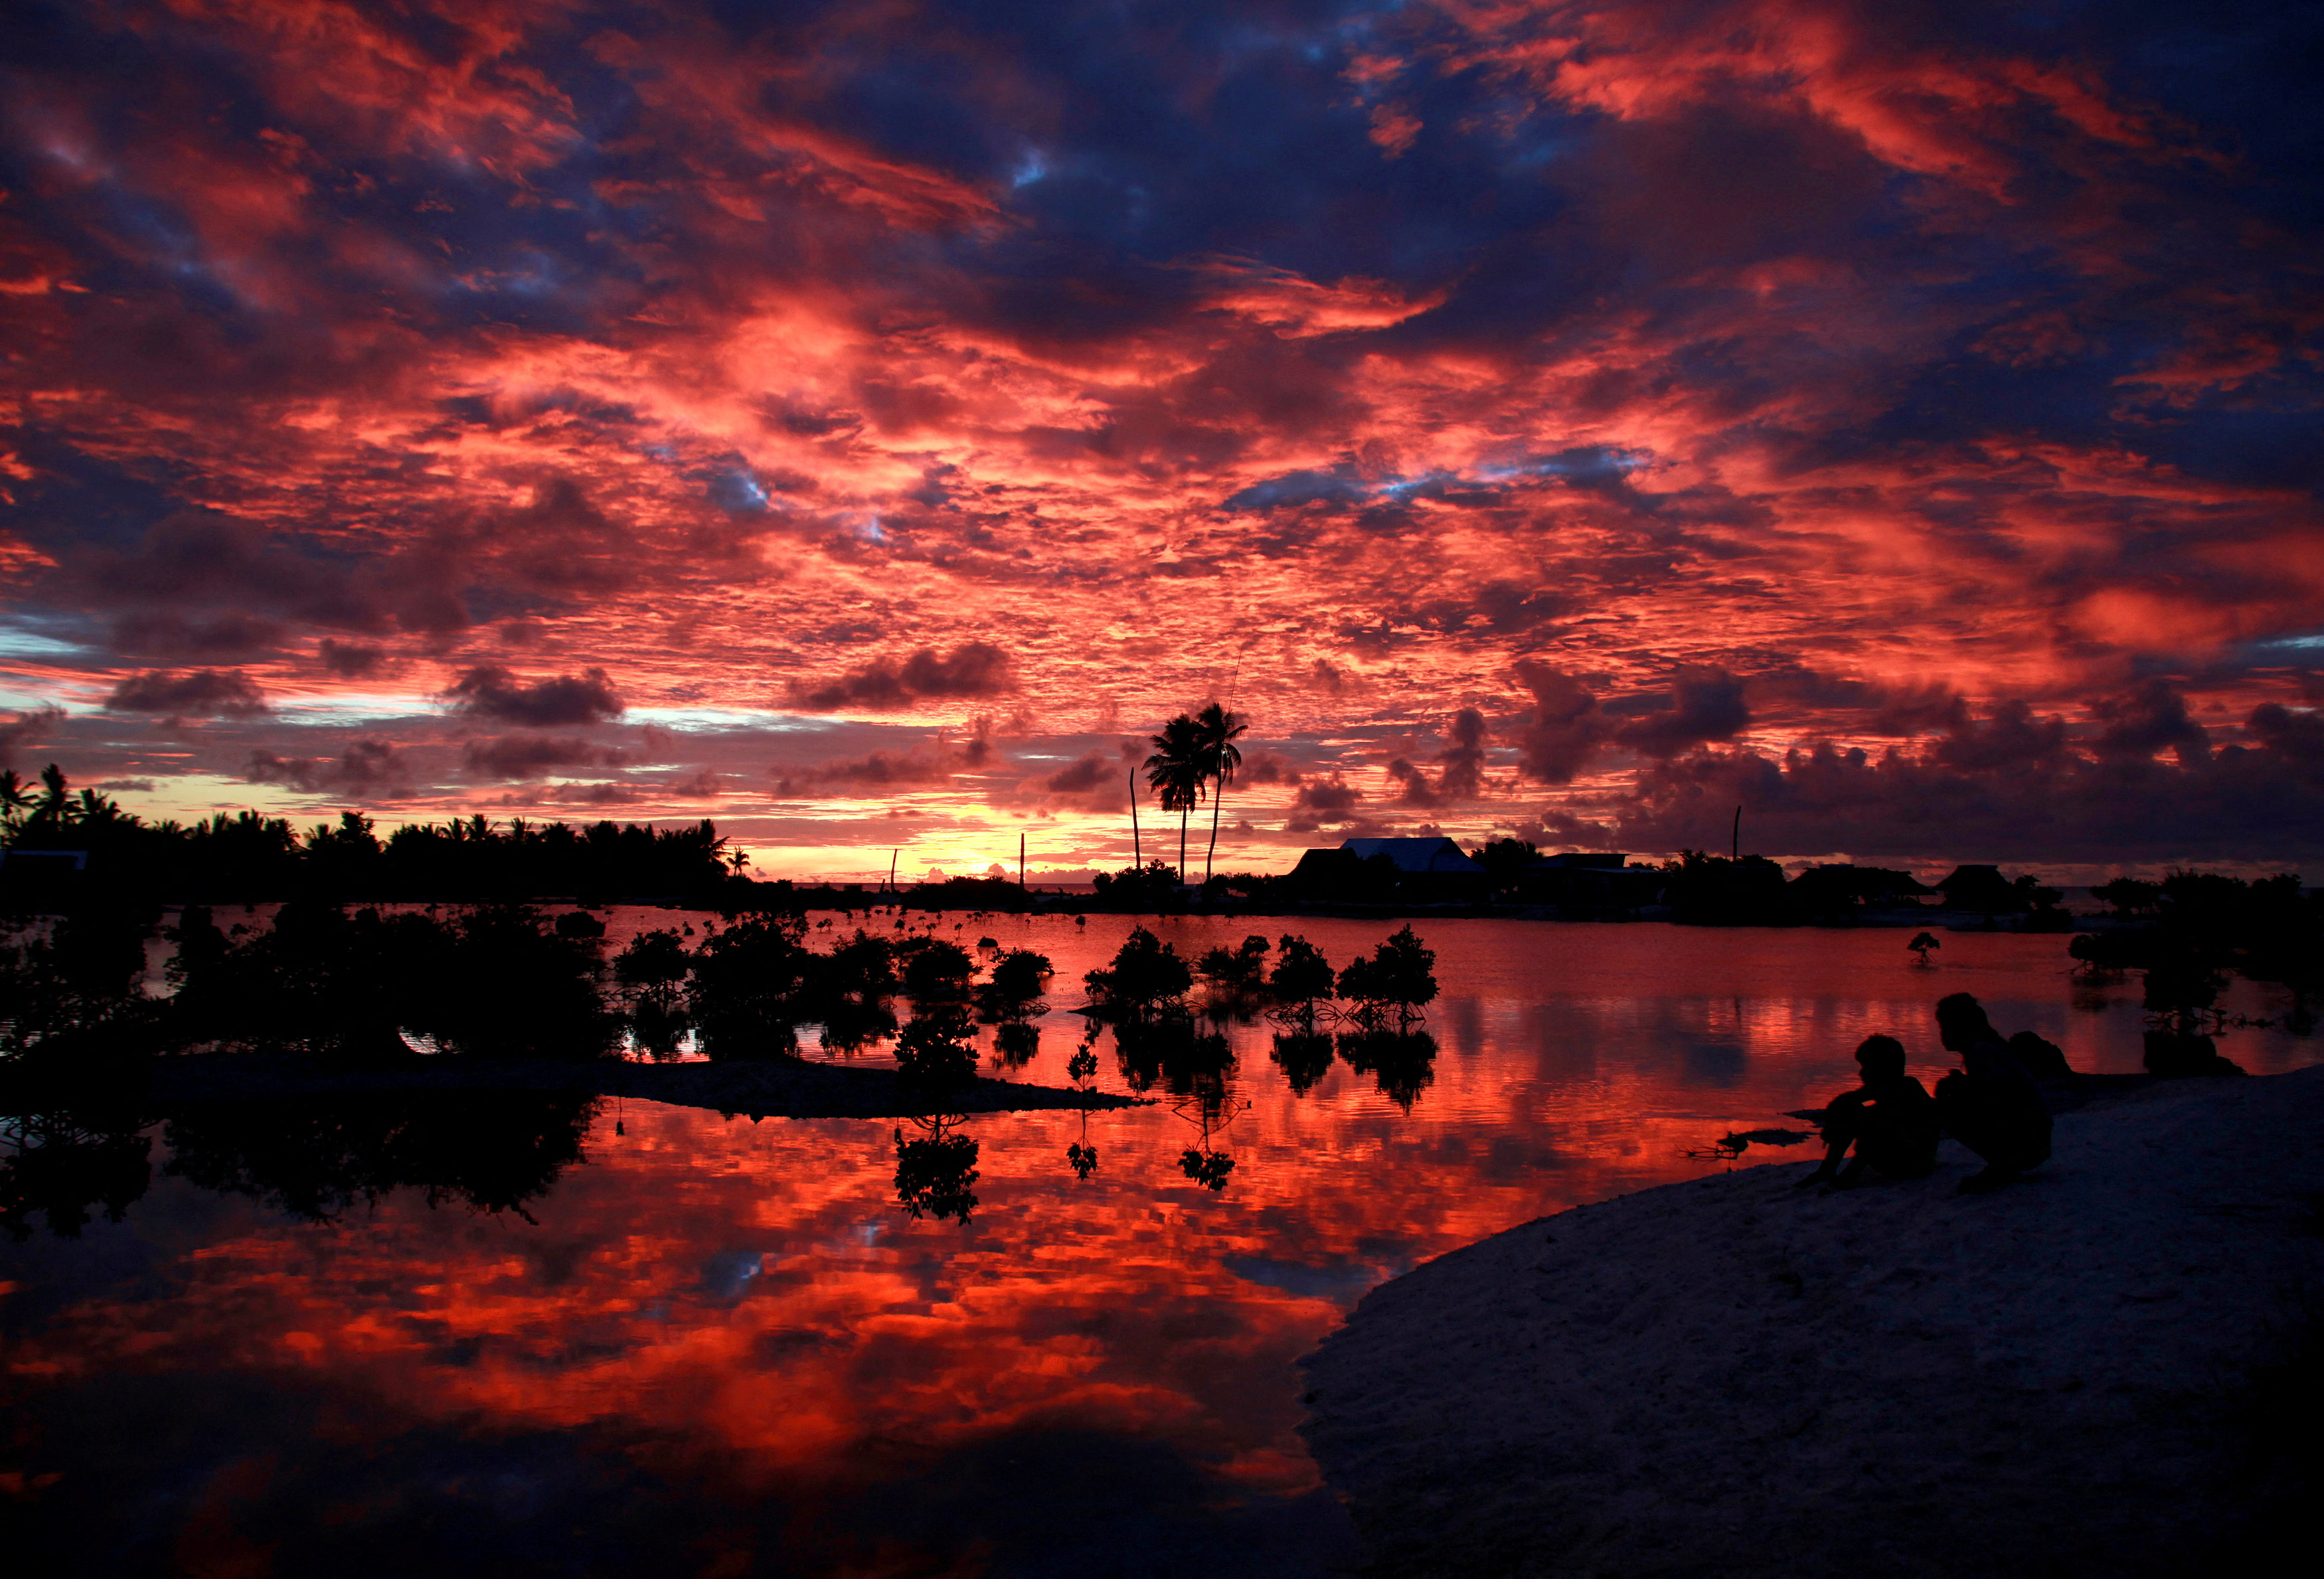 Villagers watch the sunset over a small lagoon near the village of Tangintebu on South Tarawa in the central Pacific island nation of Kiribati